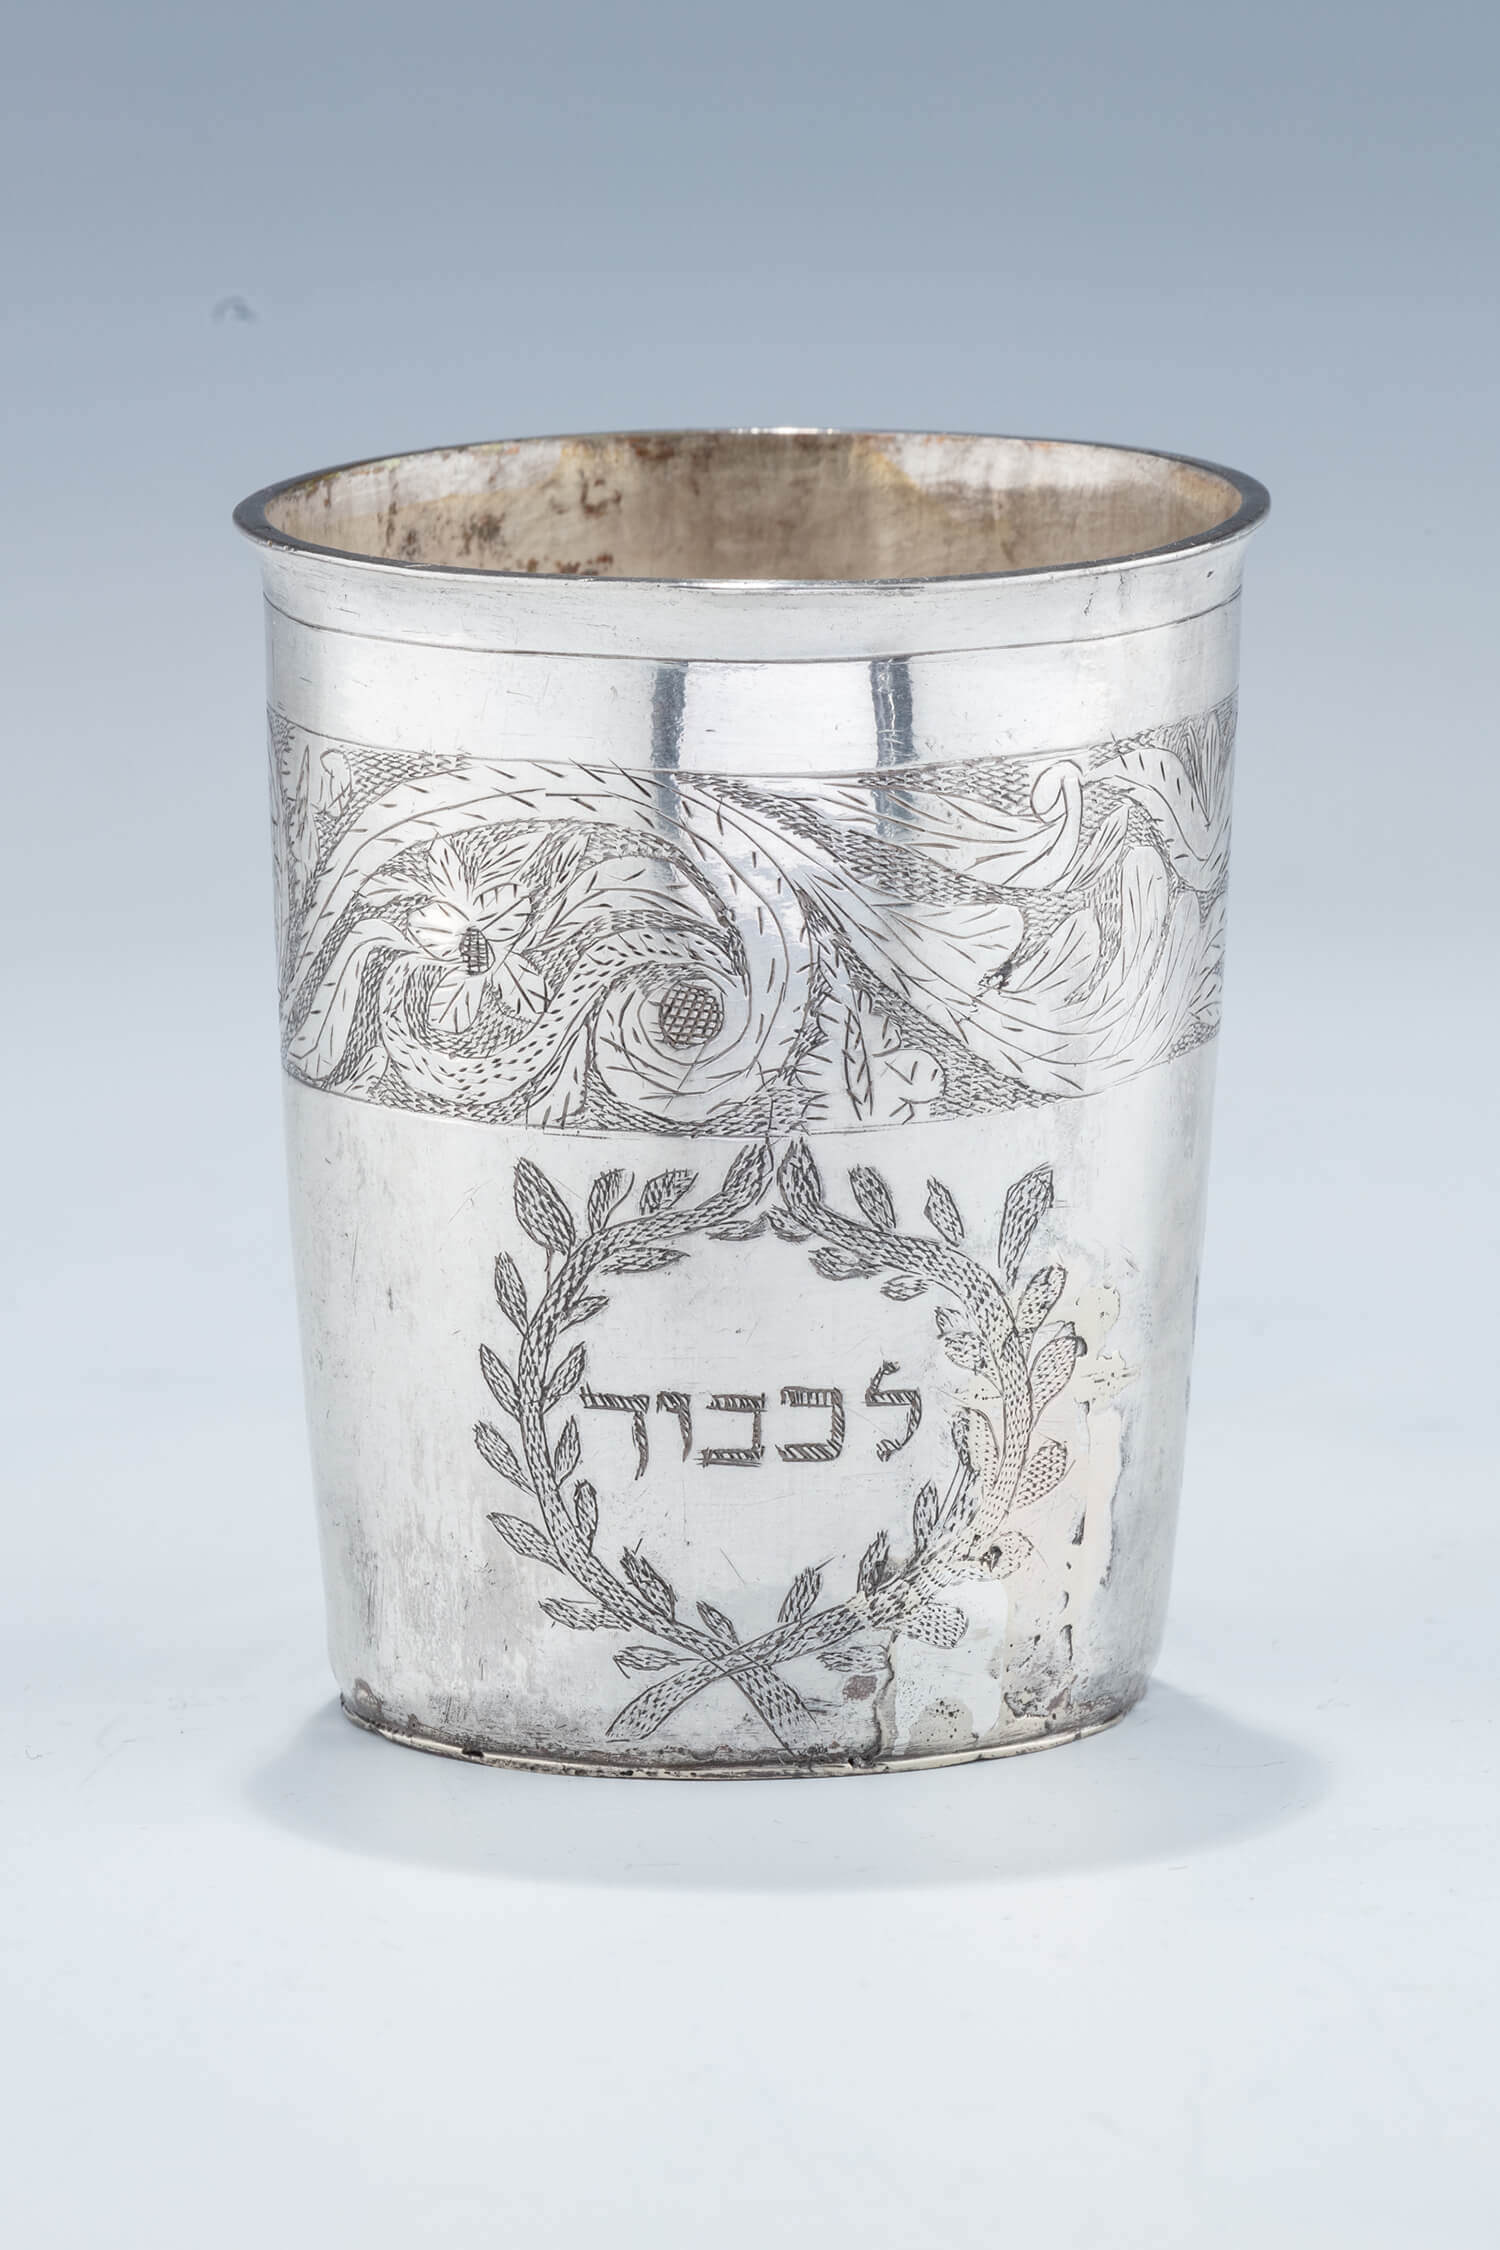 058. A LARGE SILVER KIDDUSH CUP